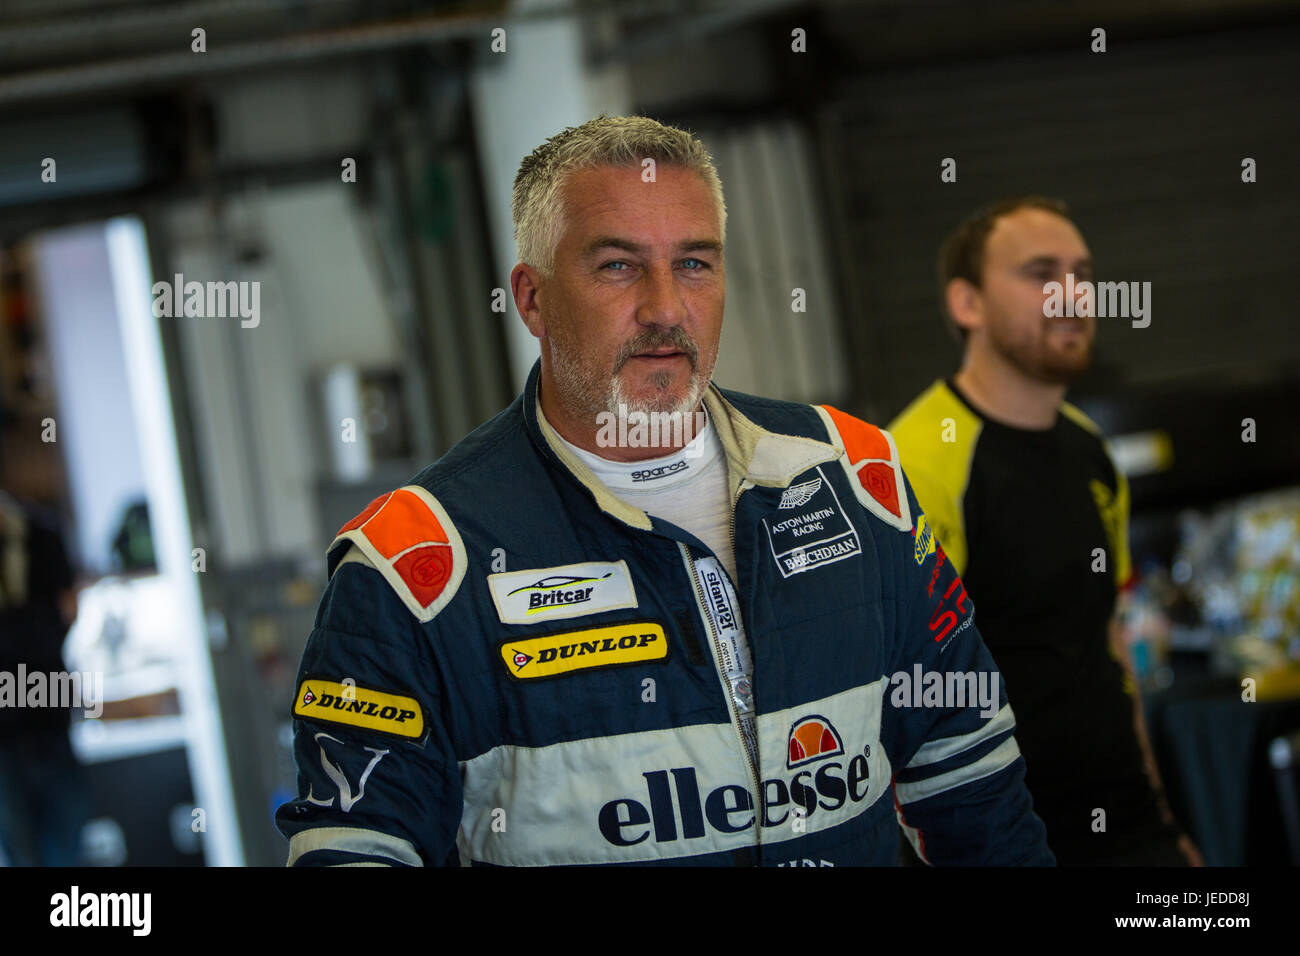 Silverstone, UK. 24th June, 2017. Paul Hollywood racing in Britcar with Beechdean Motorsport in an Aston Martin Vantage GT4 Credit: steven roe/Alamy Live News Stock Photo